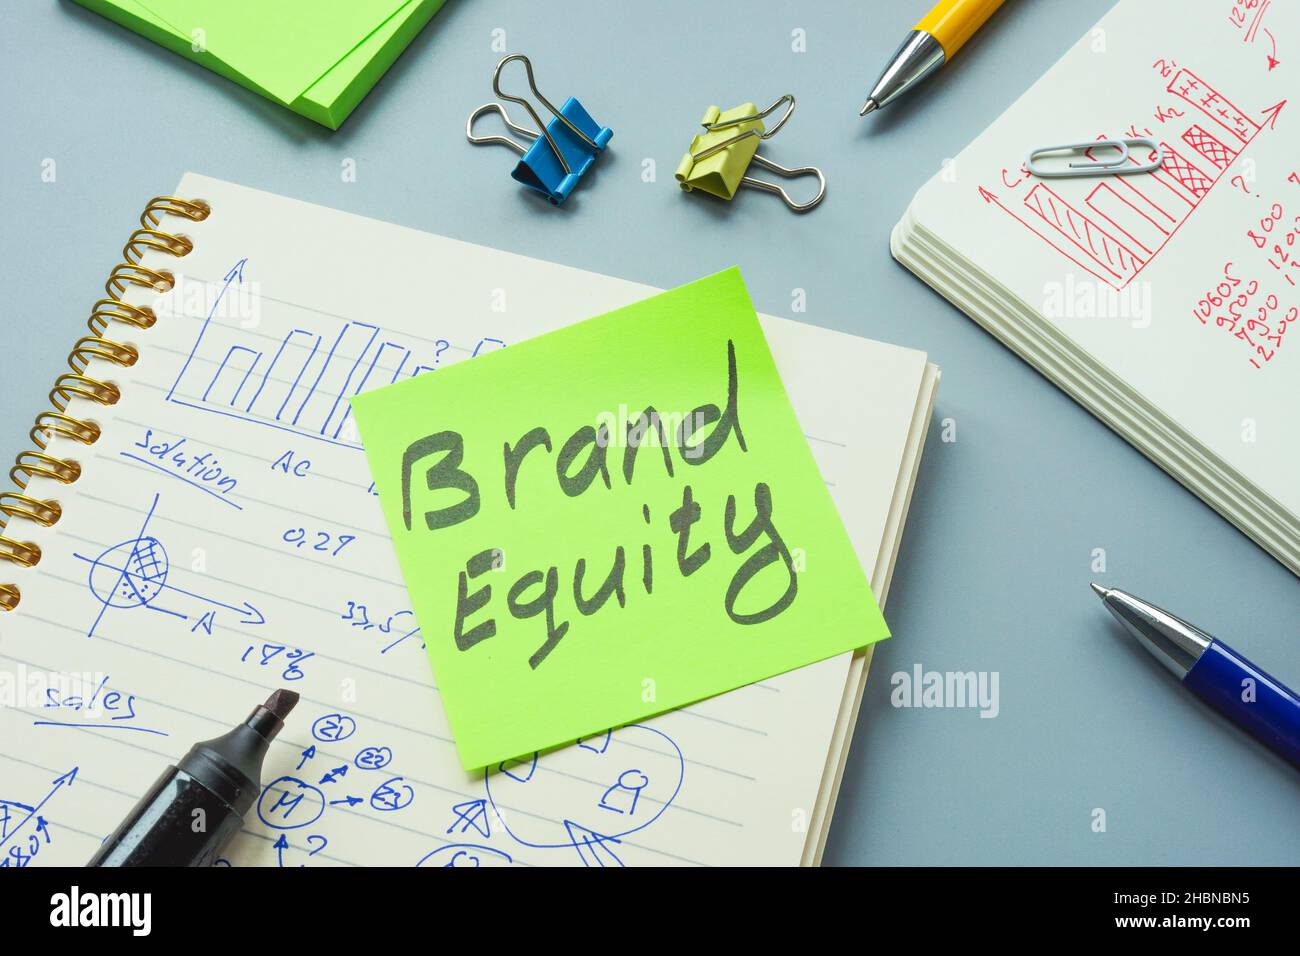 Brand equity mark and open notepad with calculations. Stock Photo